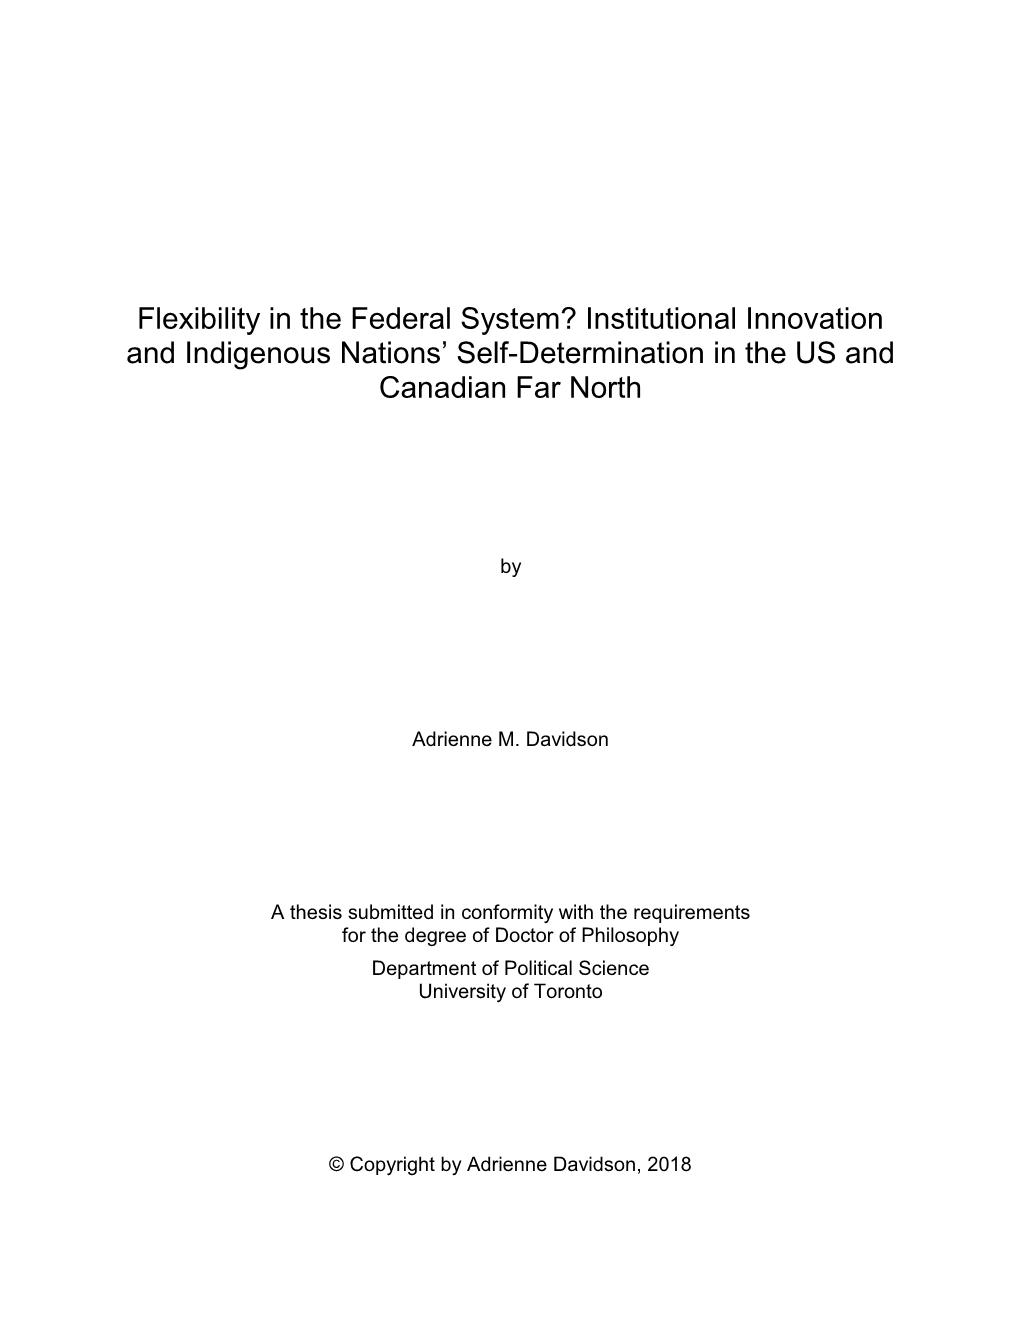 Flexibility in the Federal System? Institutional Innovation and Indigenous Nations’ Self-Determination in the US and Canadian Far North